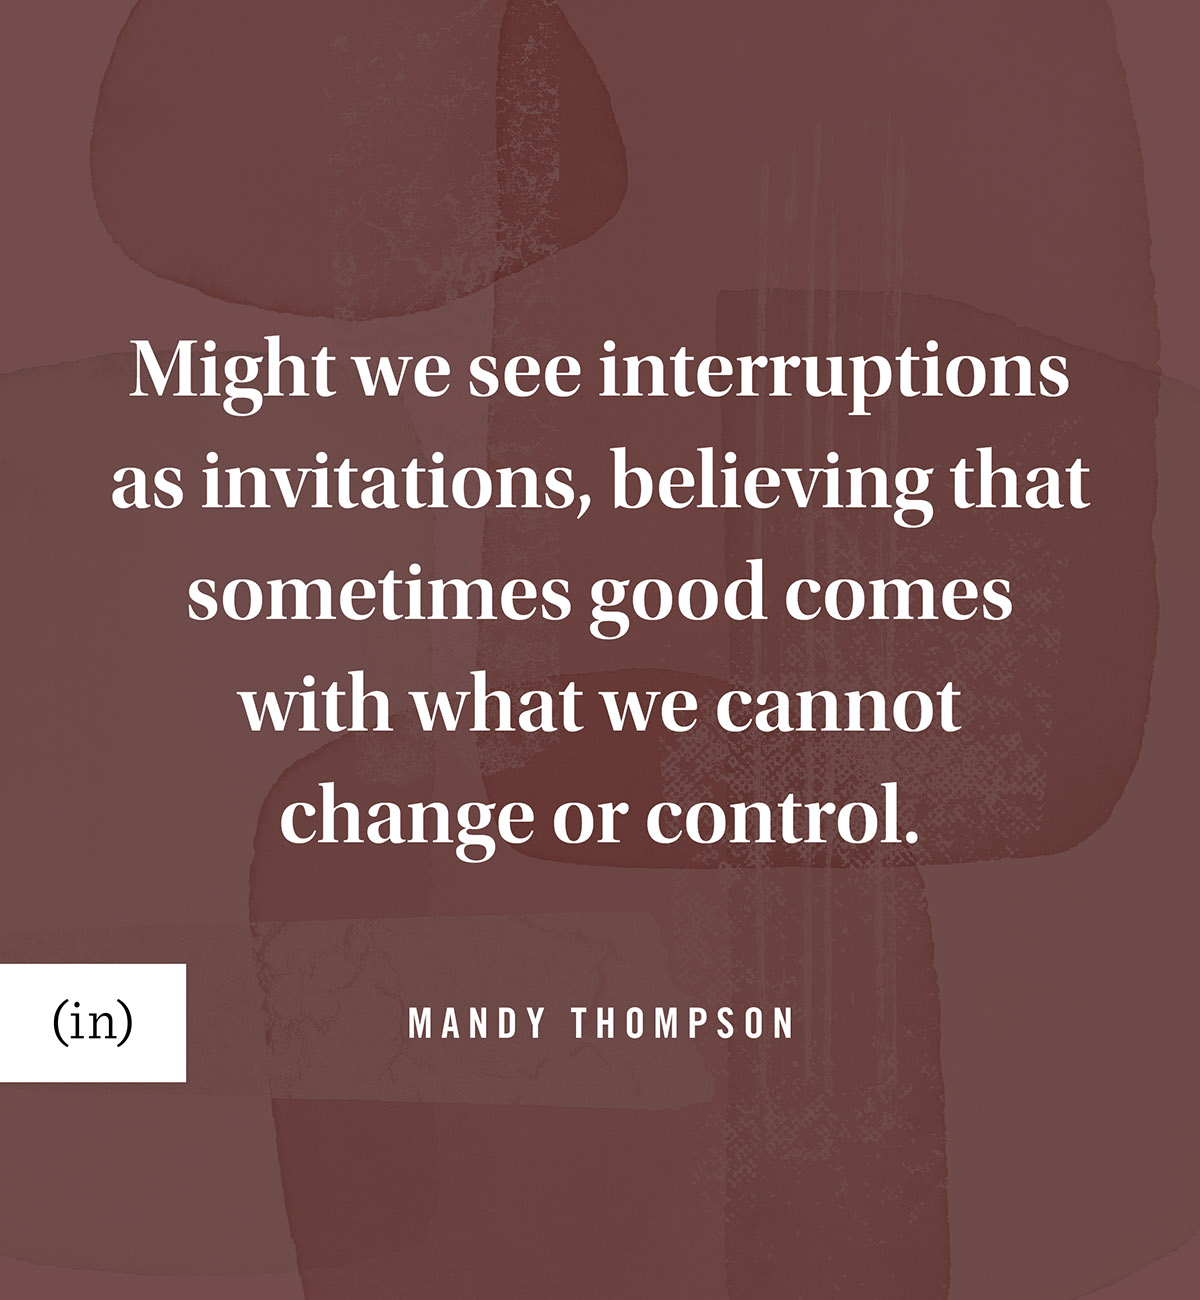 Might we see interruptions as invitations, believing that sometimes good comes with what we cannot change or control. -Mandy Thompson